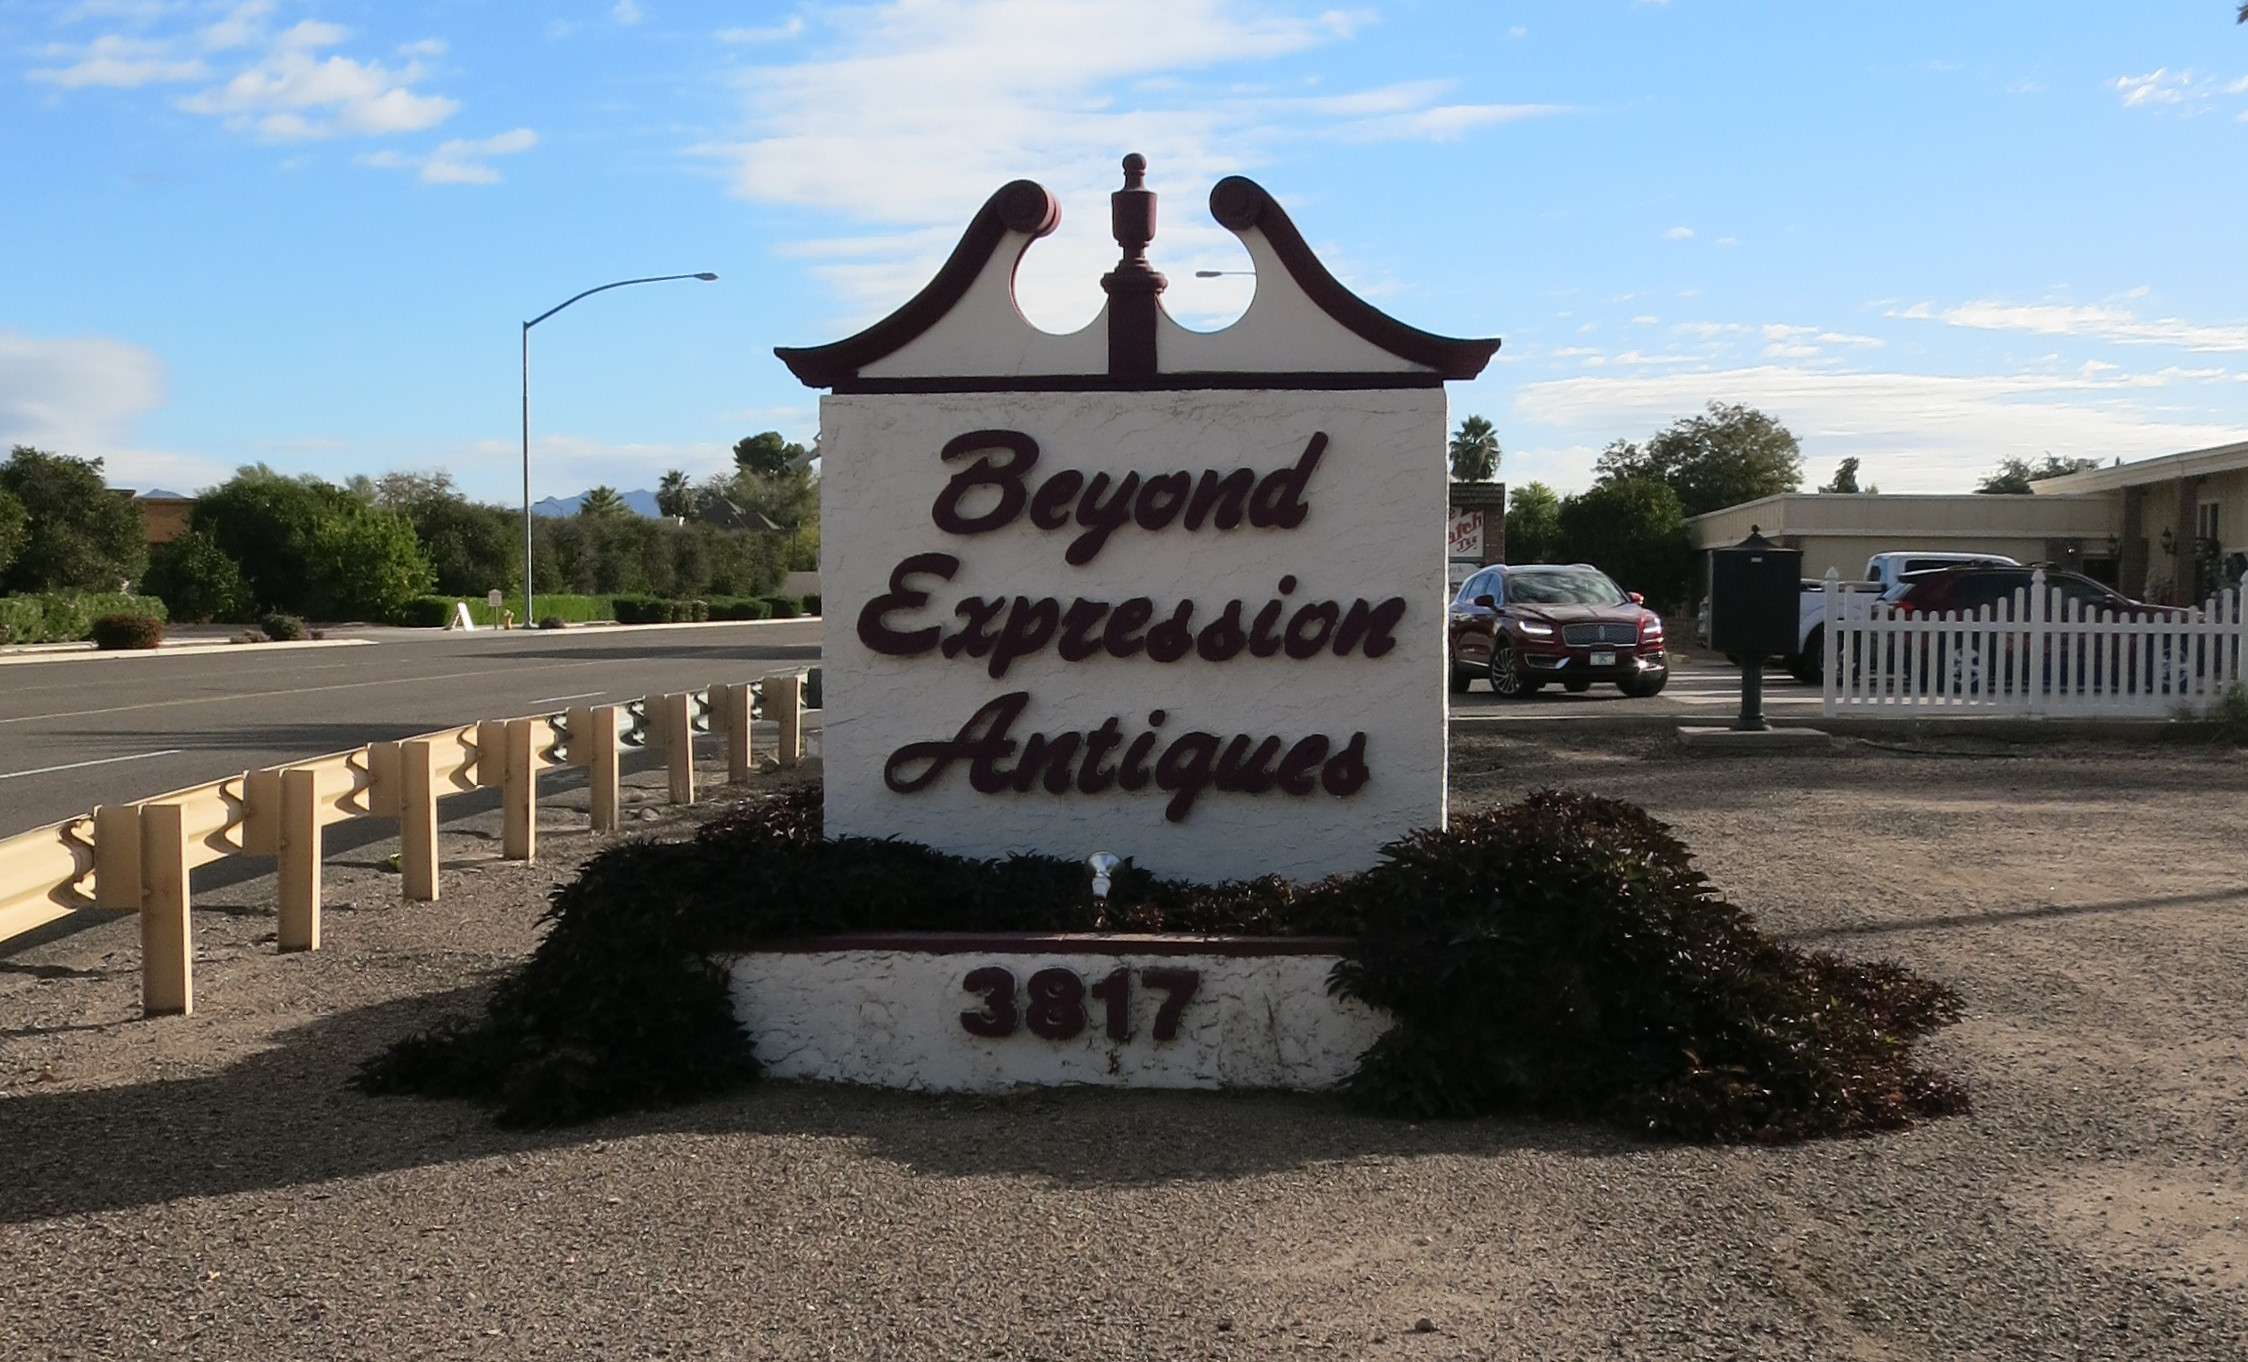 Beyond Expression Antiques